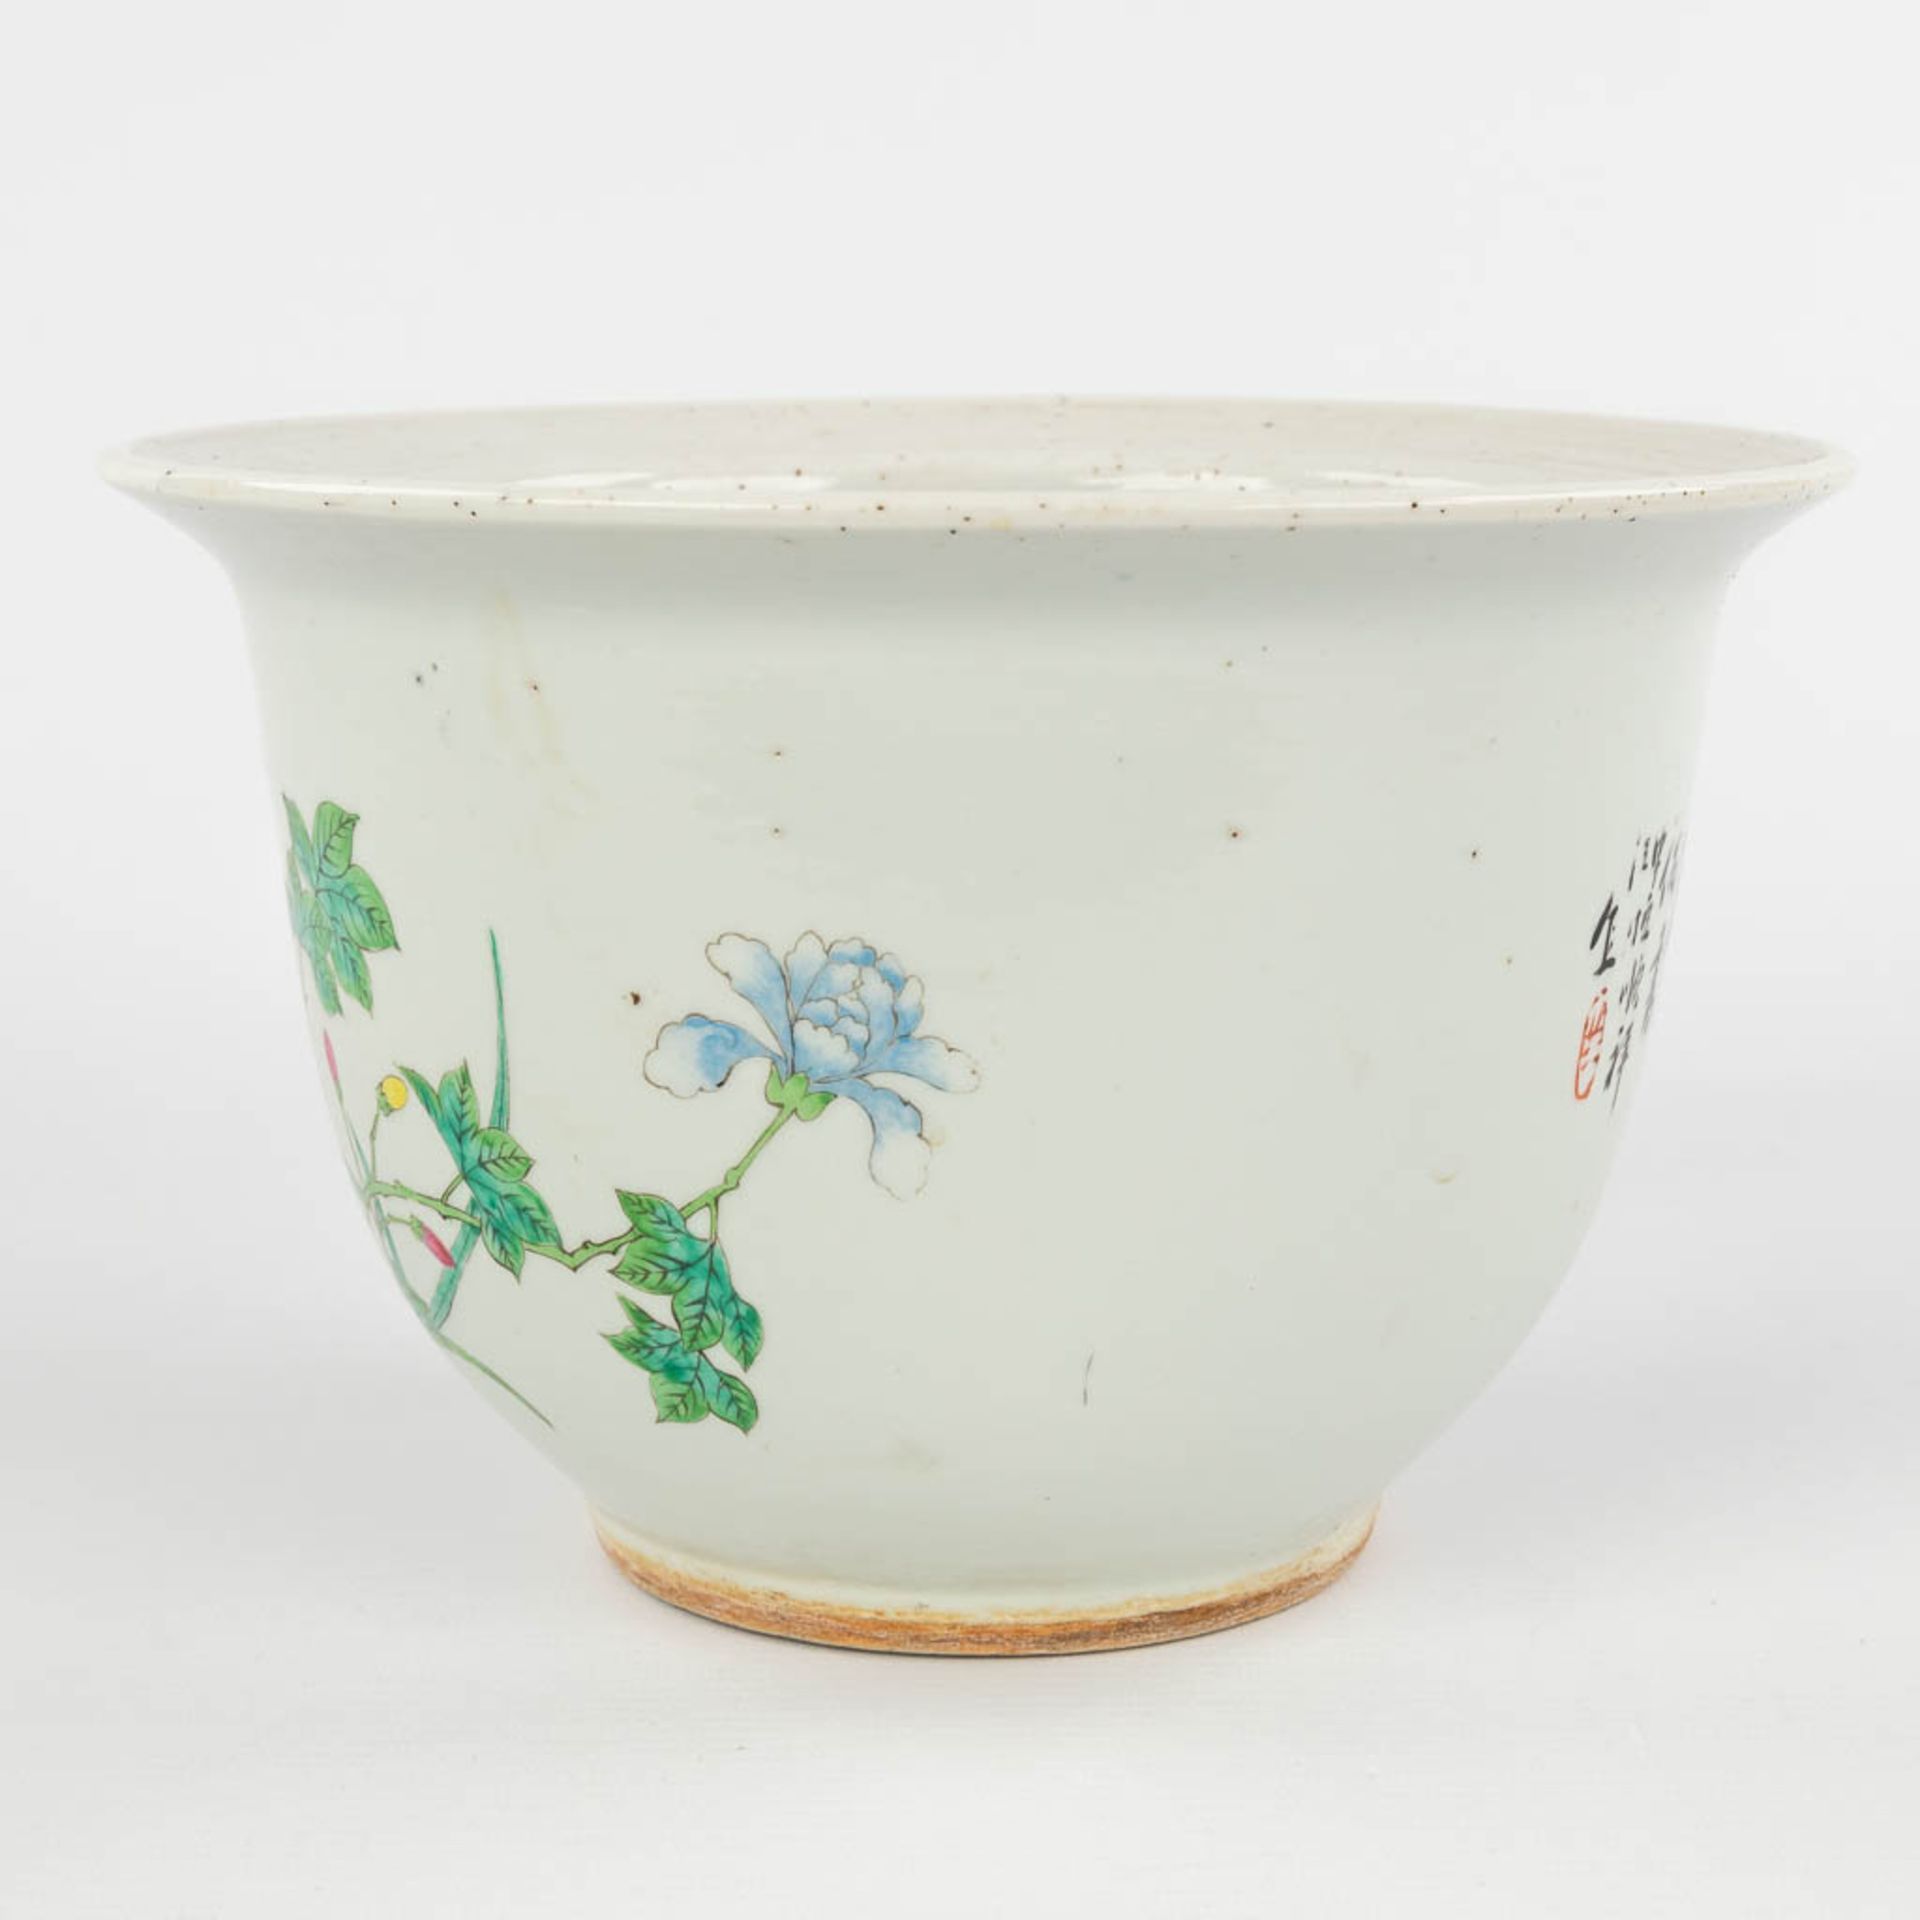 A Chinese Famille Rose cache pot, decorated with flowers. 19th/20th C. (H:15,5 x D:23,5 cm) - Image 6 of 10